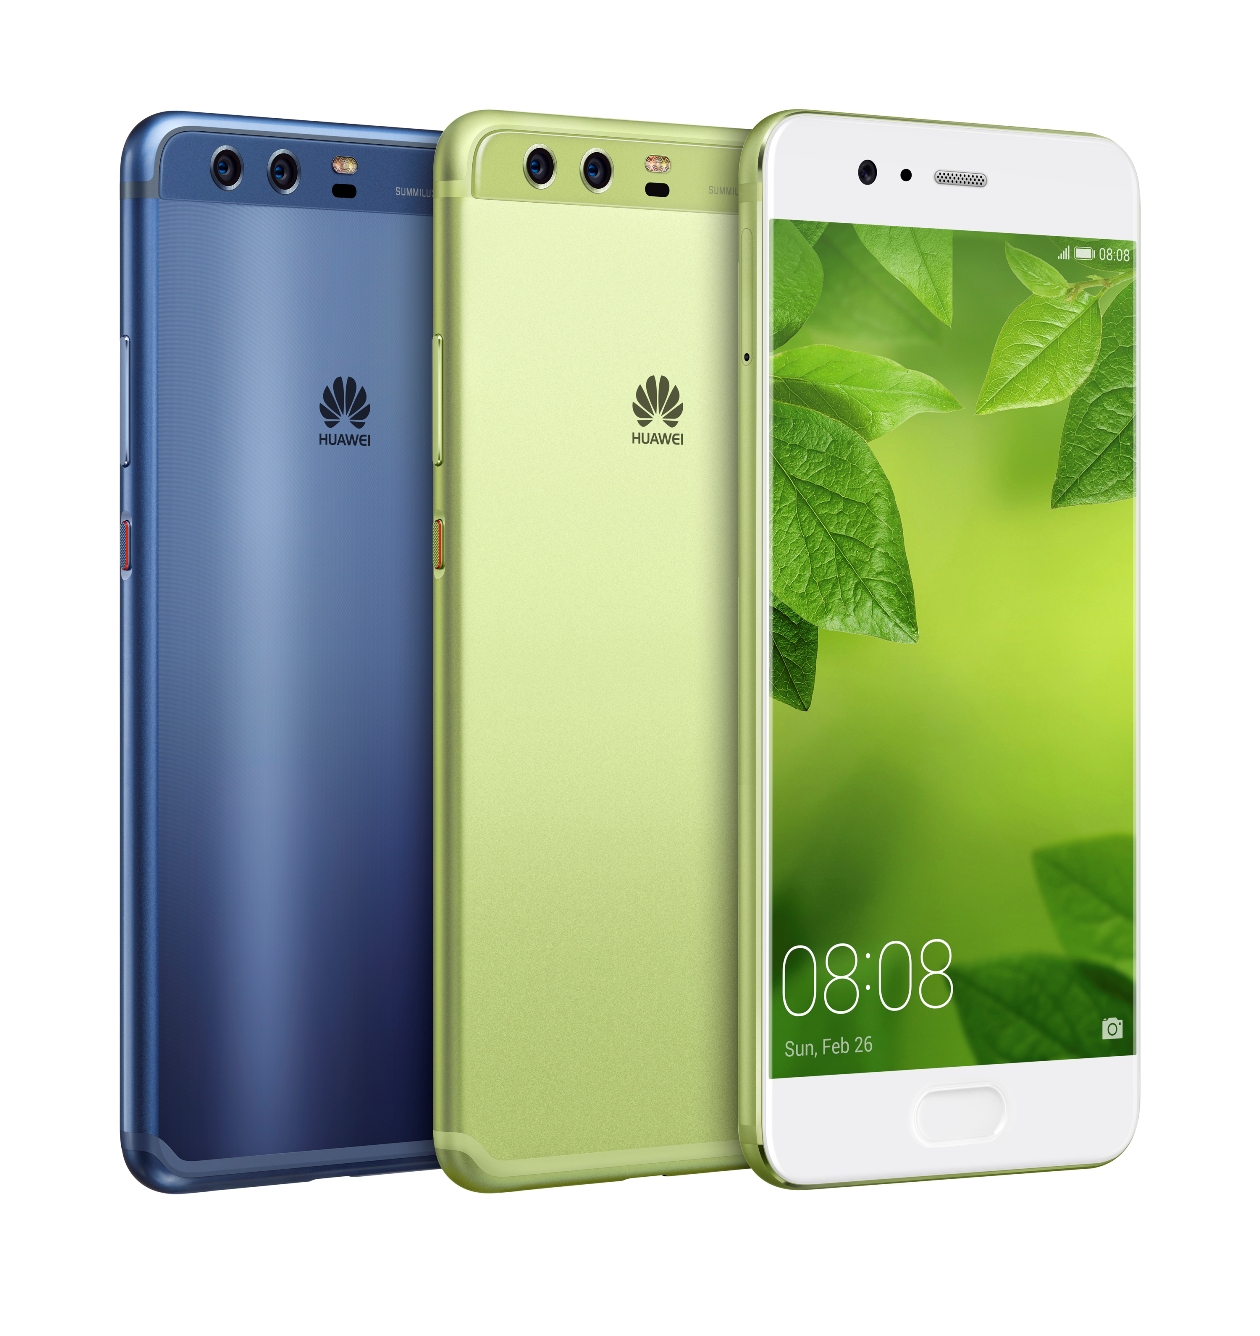 Last Chance To Pre-Book And Win A Huawei P10 on the first Sale